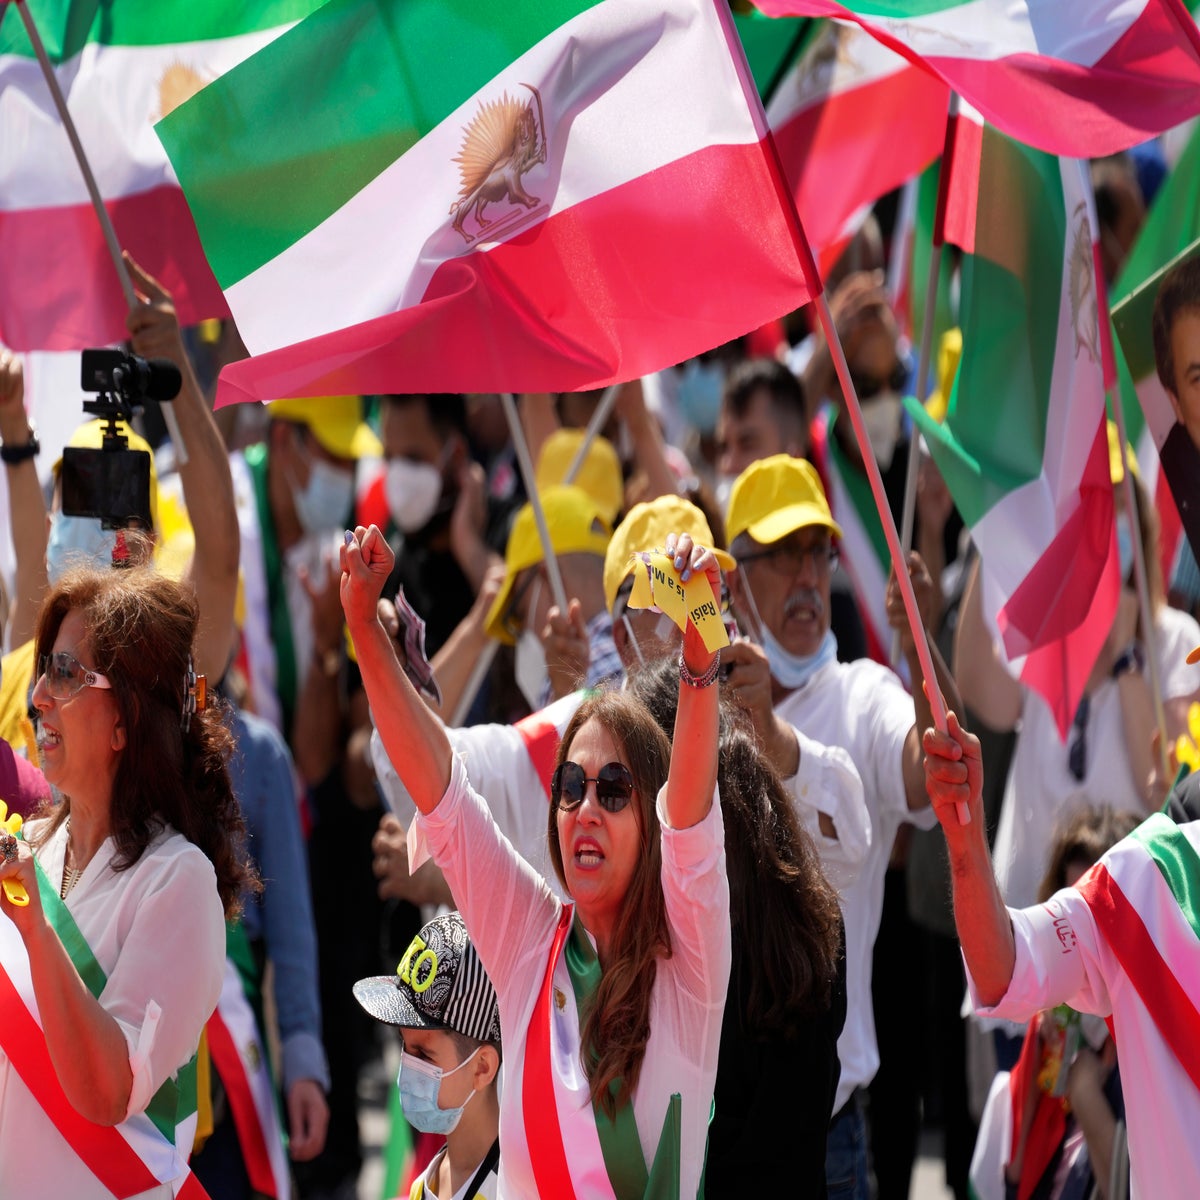 Iran anger at US, European support for opposition group Berlin John Bercow Republican Maryam Rajavi Janez Jansa | The Independent